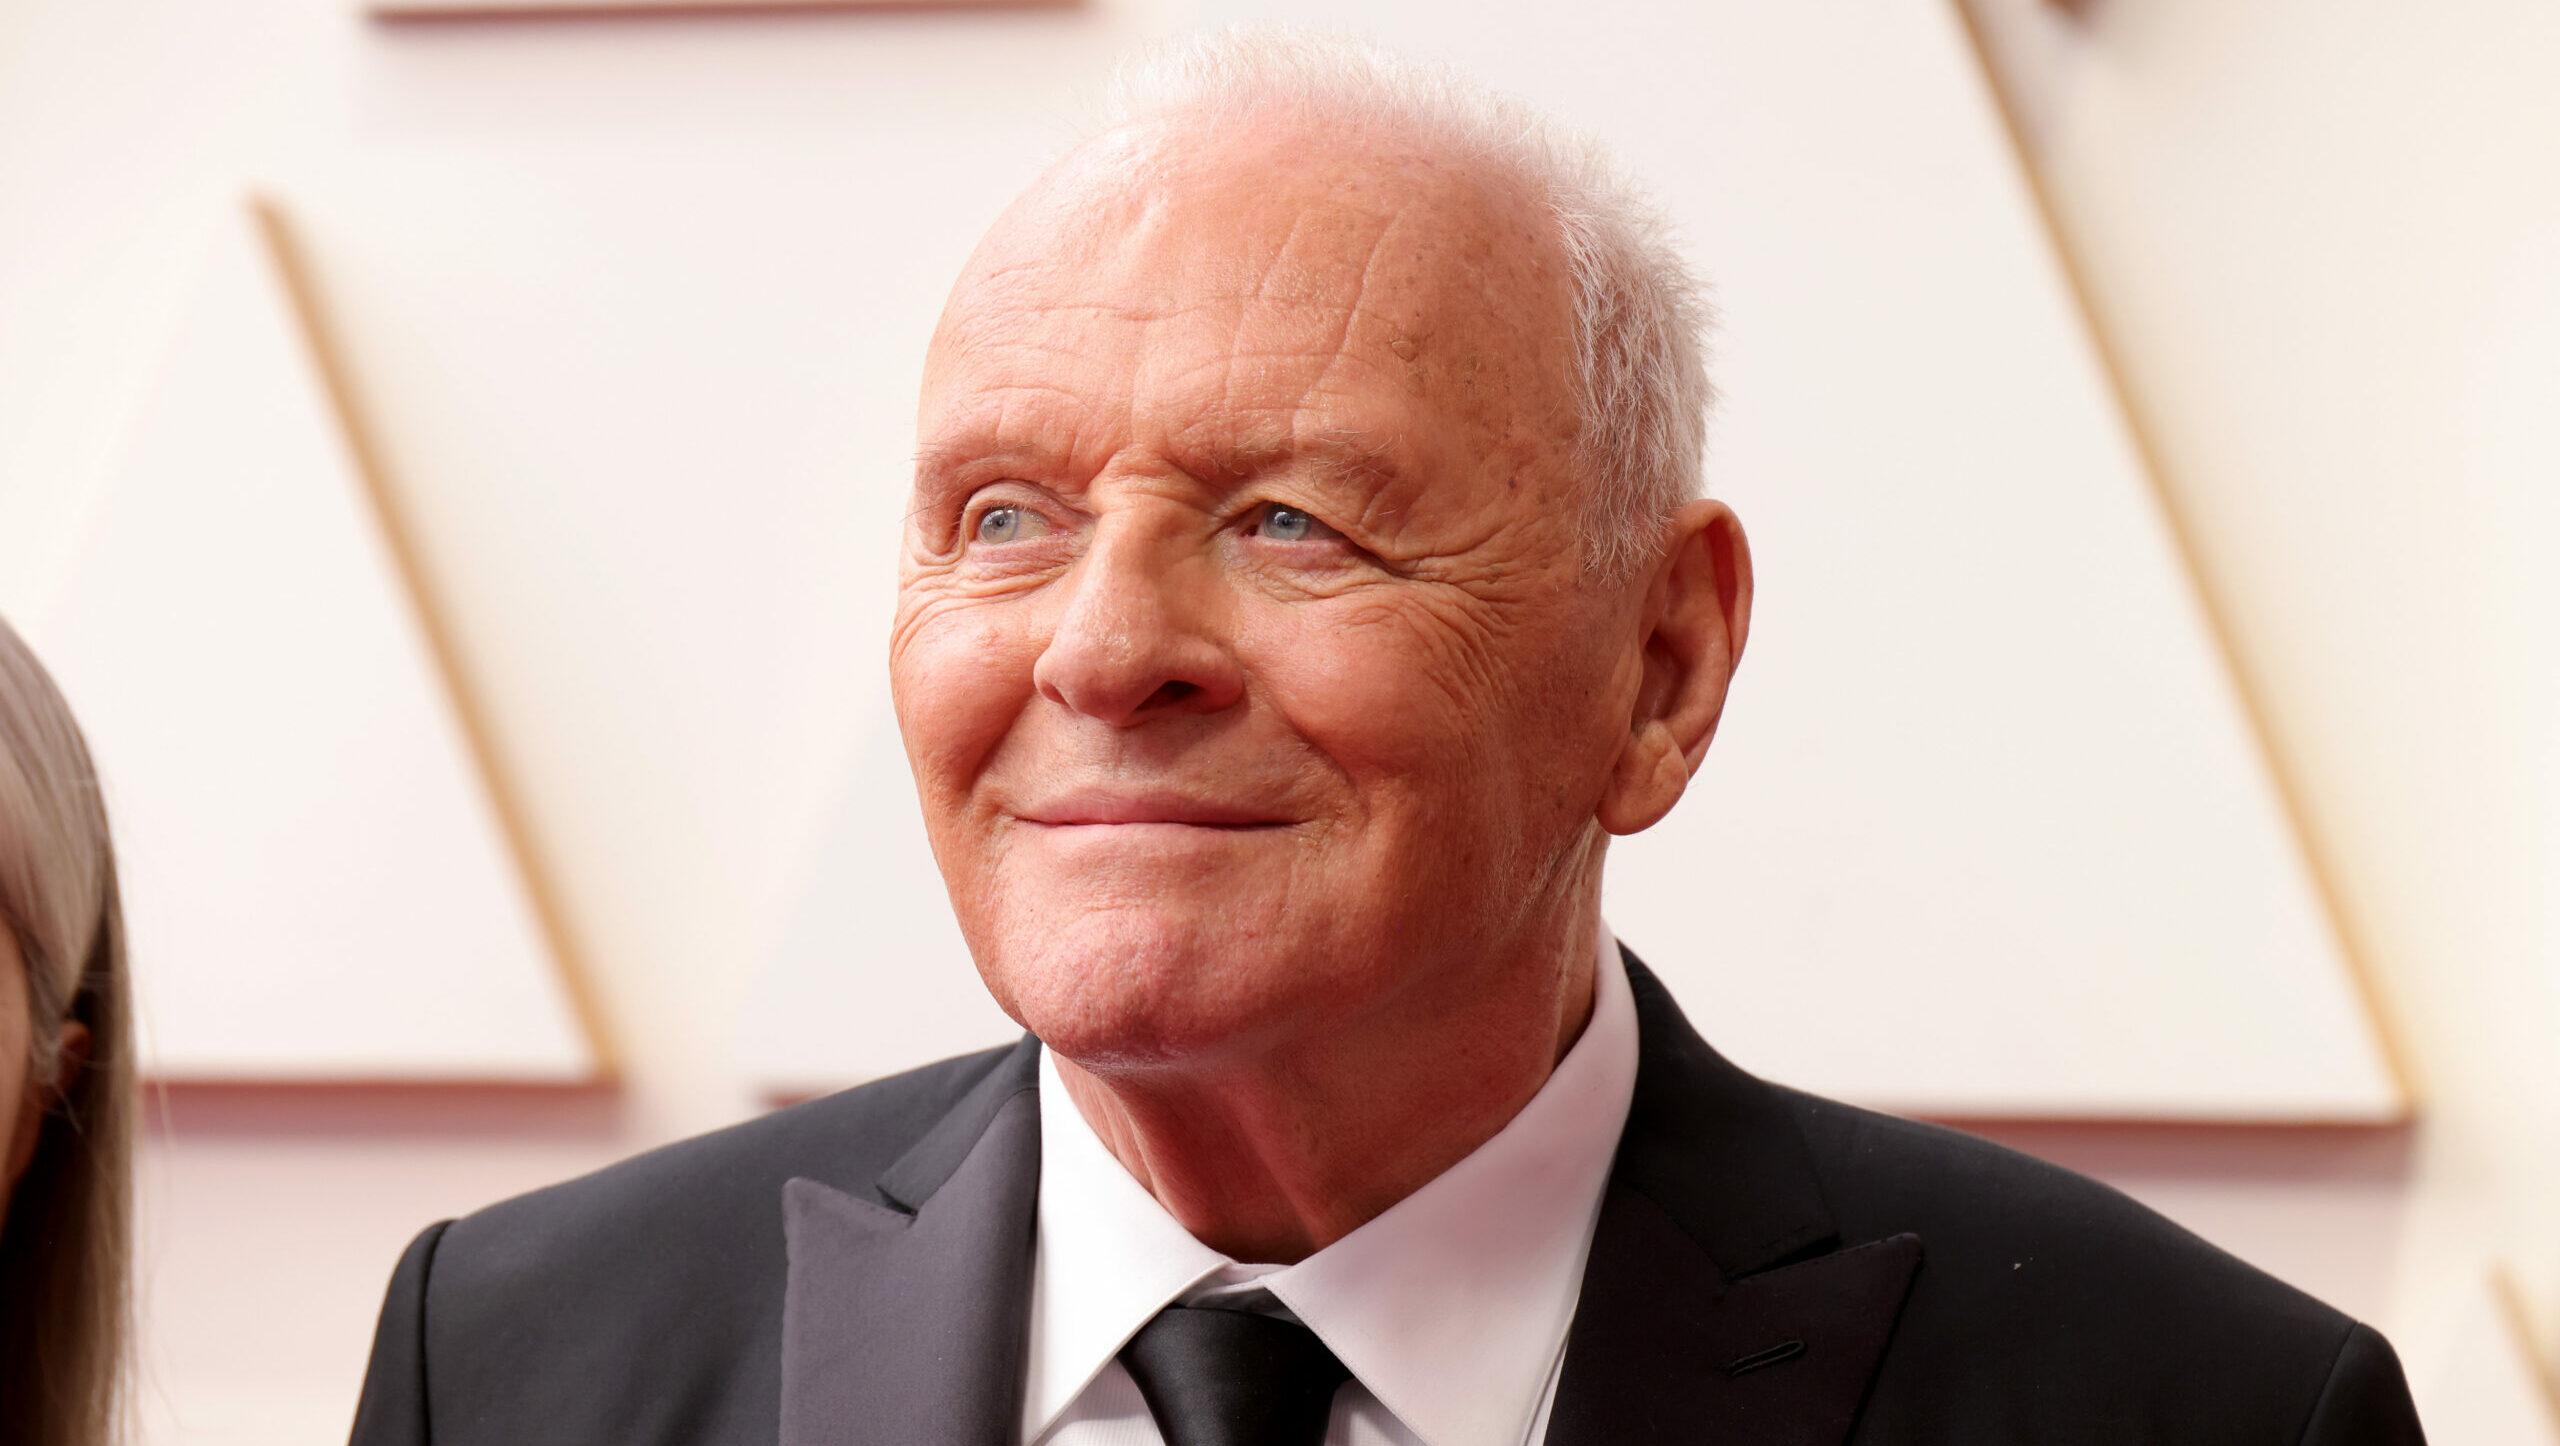 Watch: Anthony Hopkins dances solely for our amusement, and why the hell not